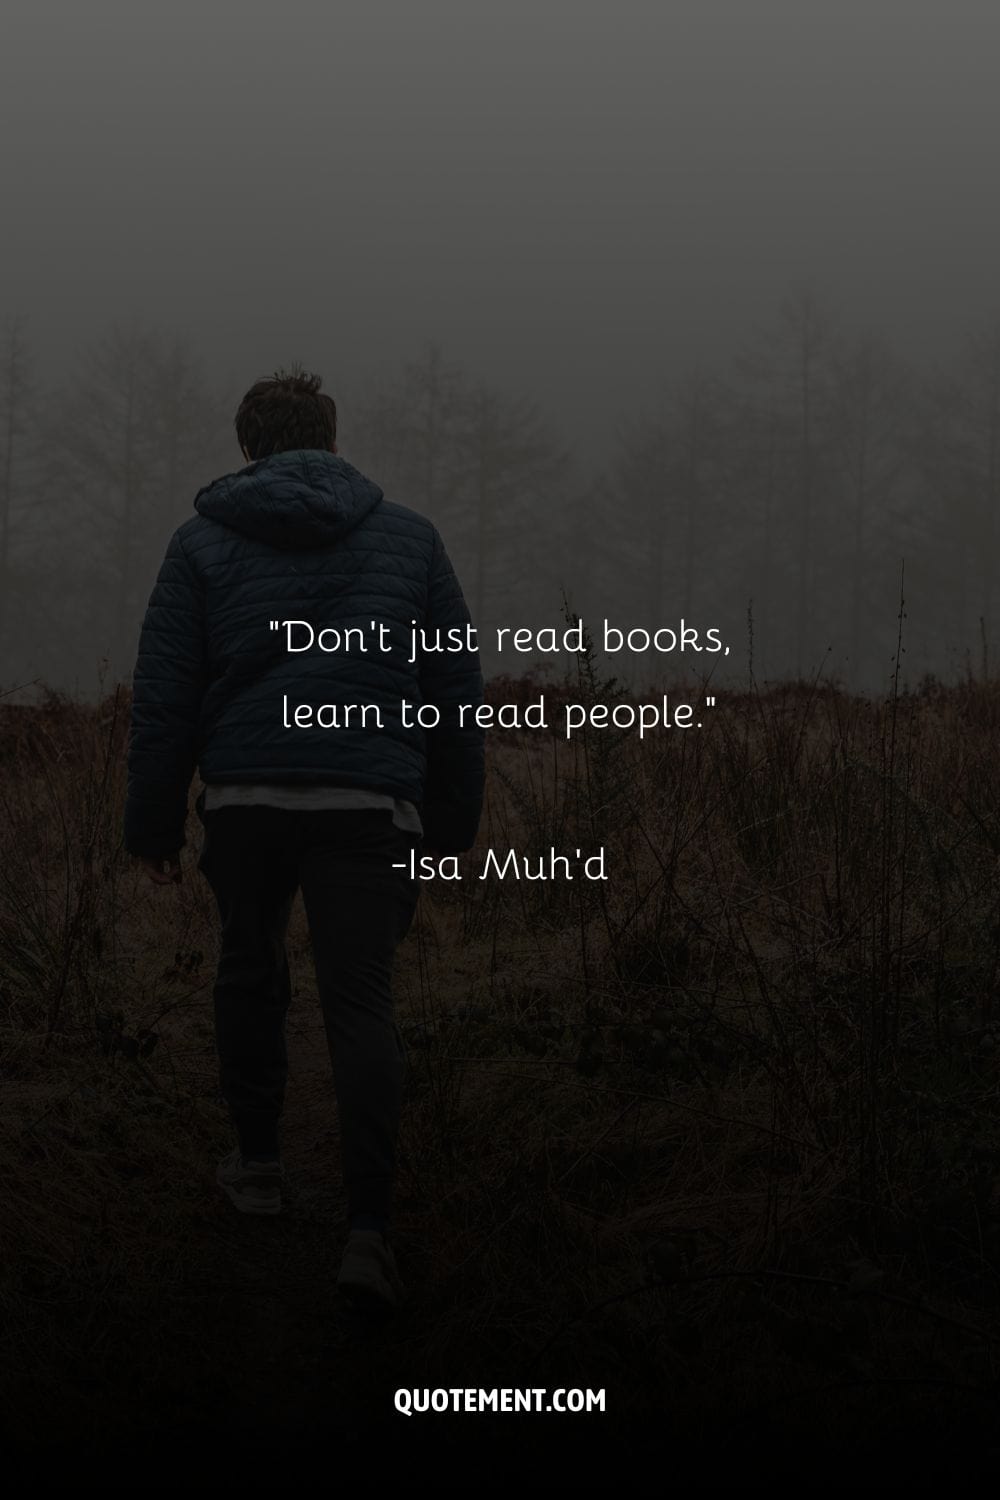 Don't just read books, learn to read people